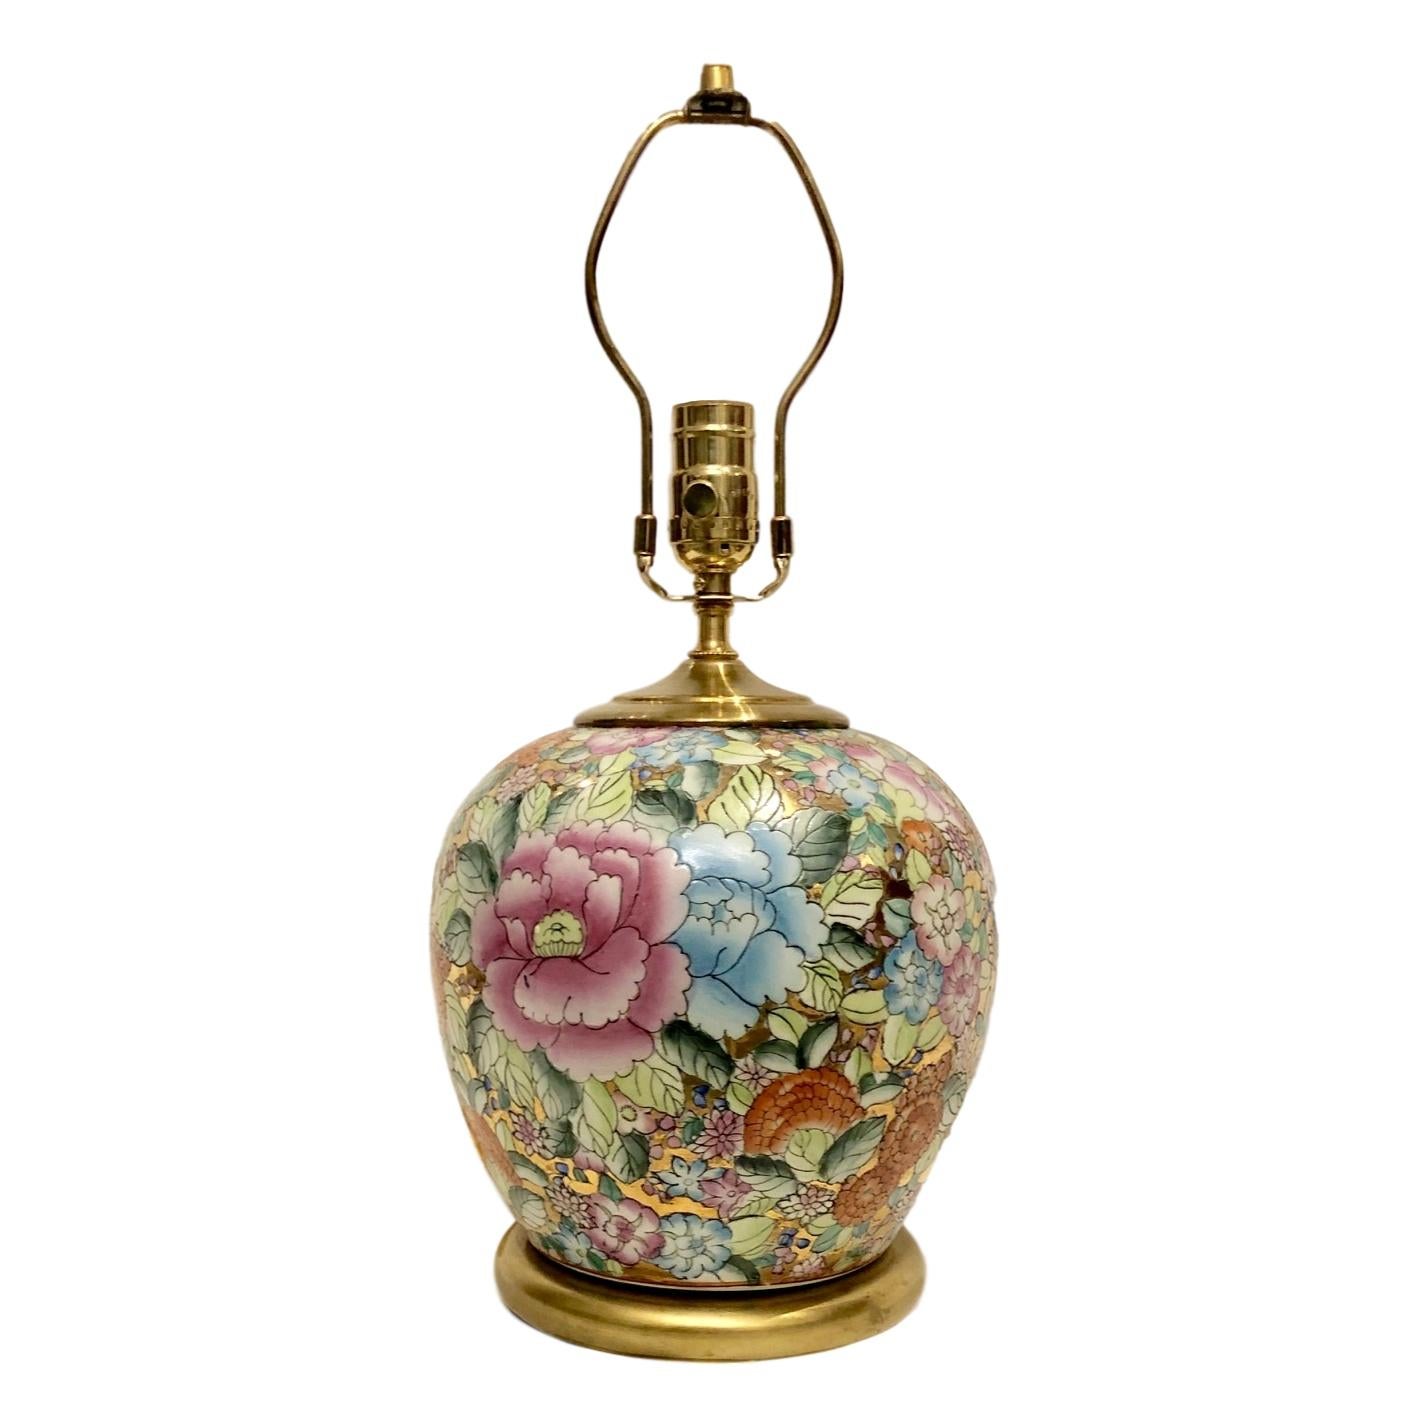 A single circa 1950s Chinese porcelain table lamp.

Measurements:
Height 10.5